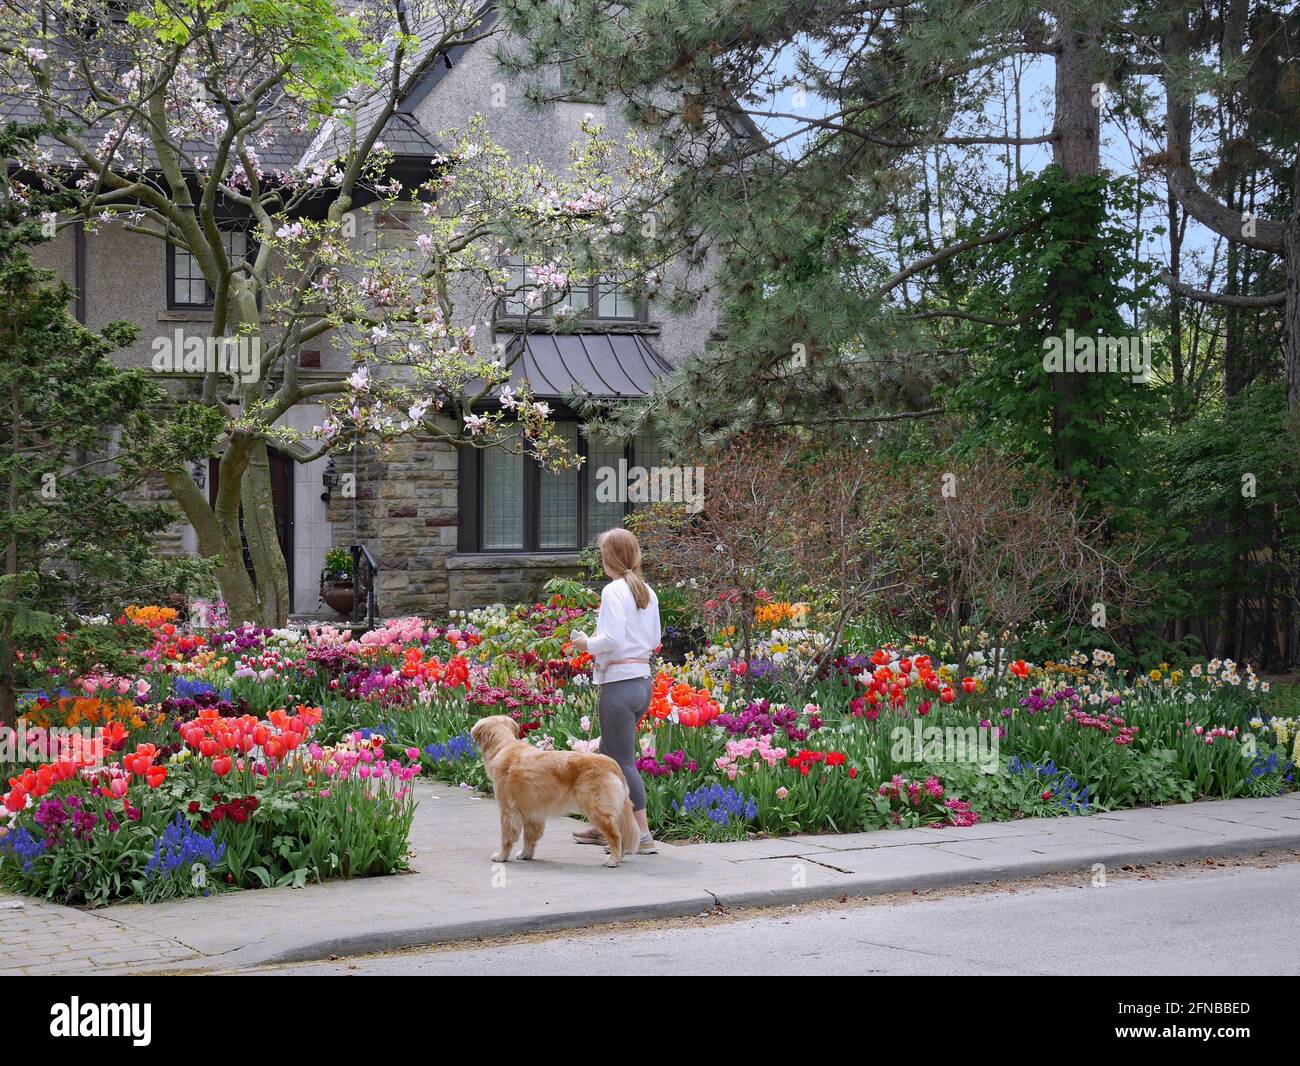 A woman walking her dog pauses to admire a colorful spring garden Stock Photo